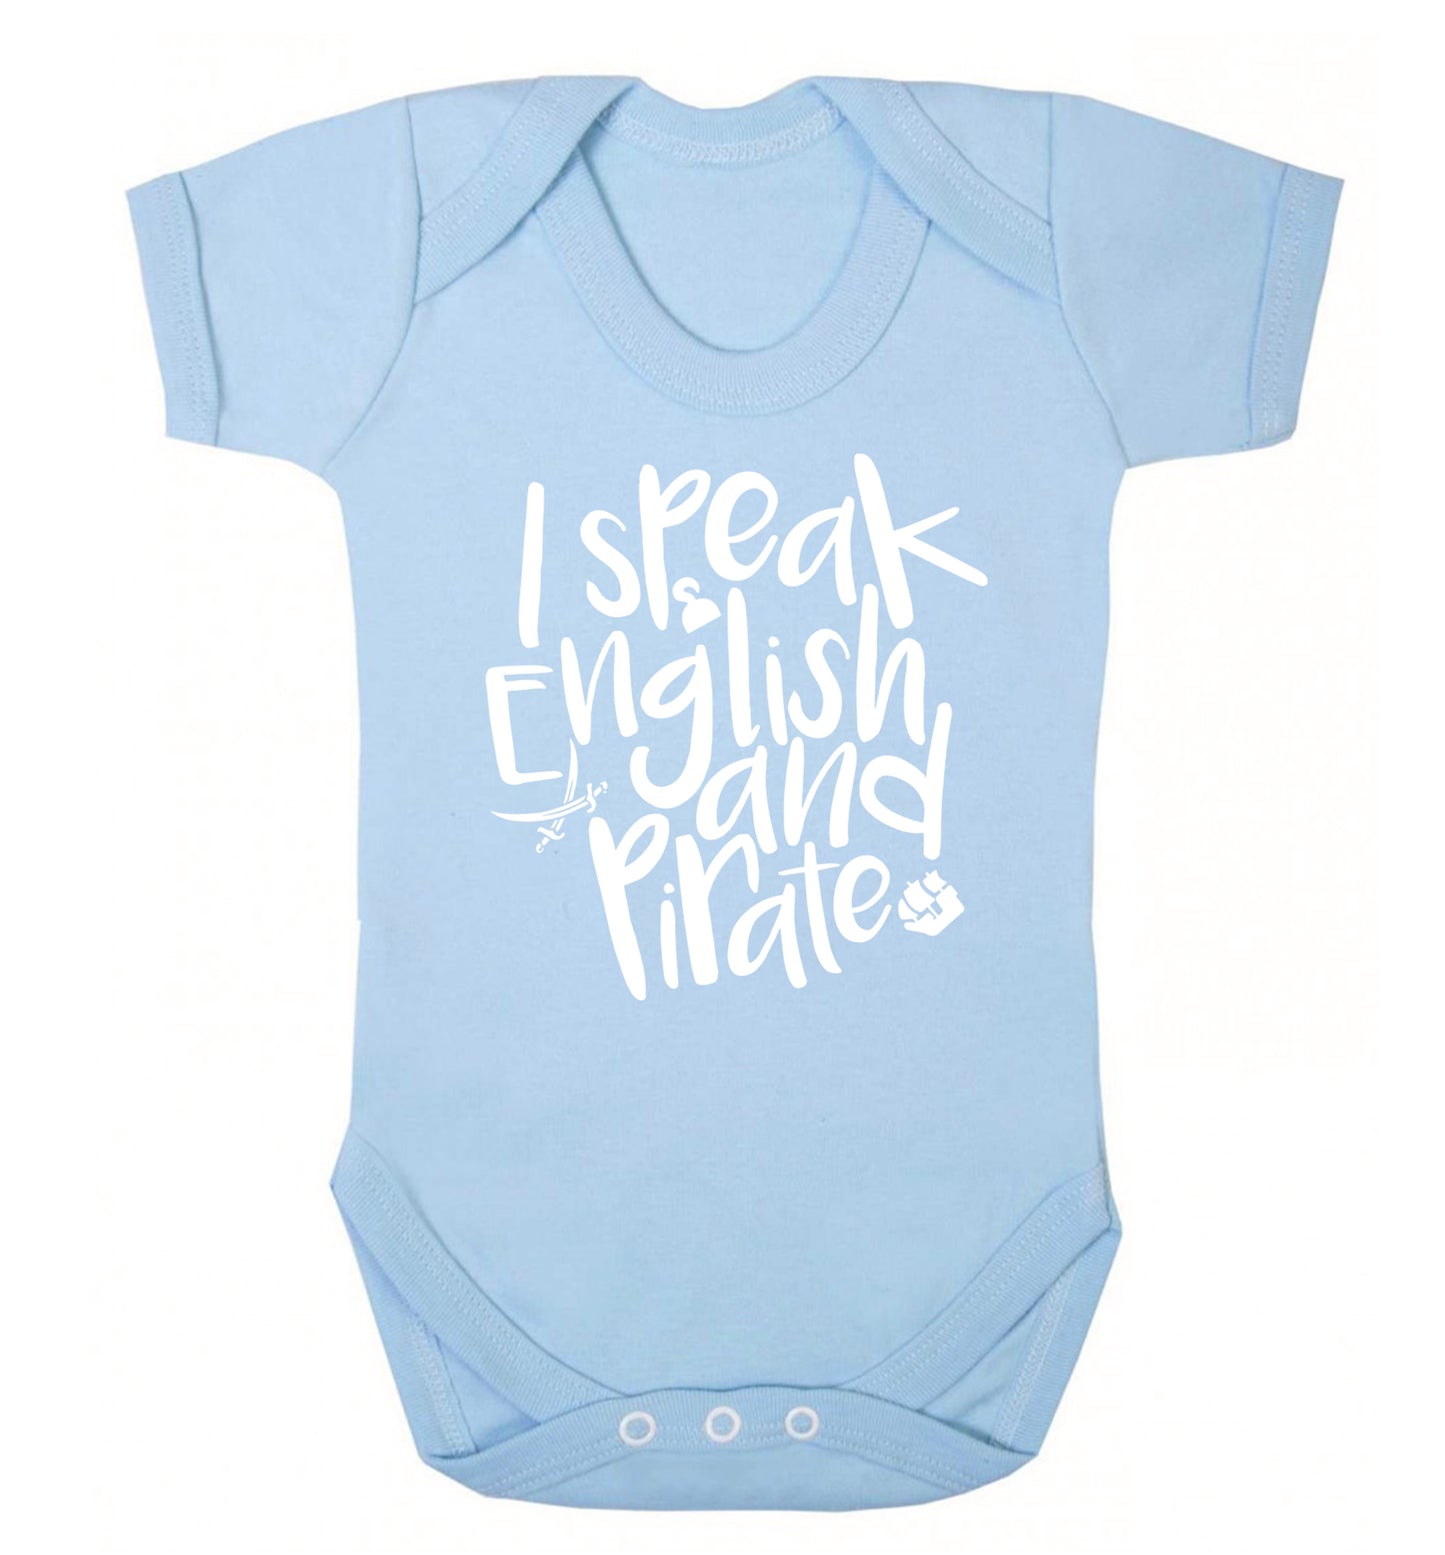 I speak English and pirate Baby Vest pale blue 18-24 months